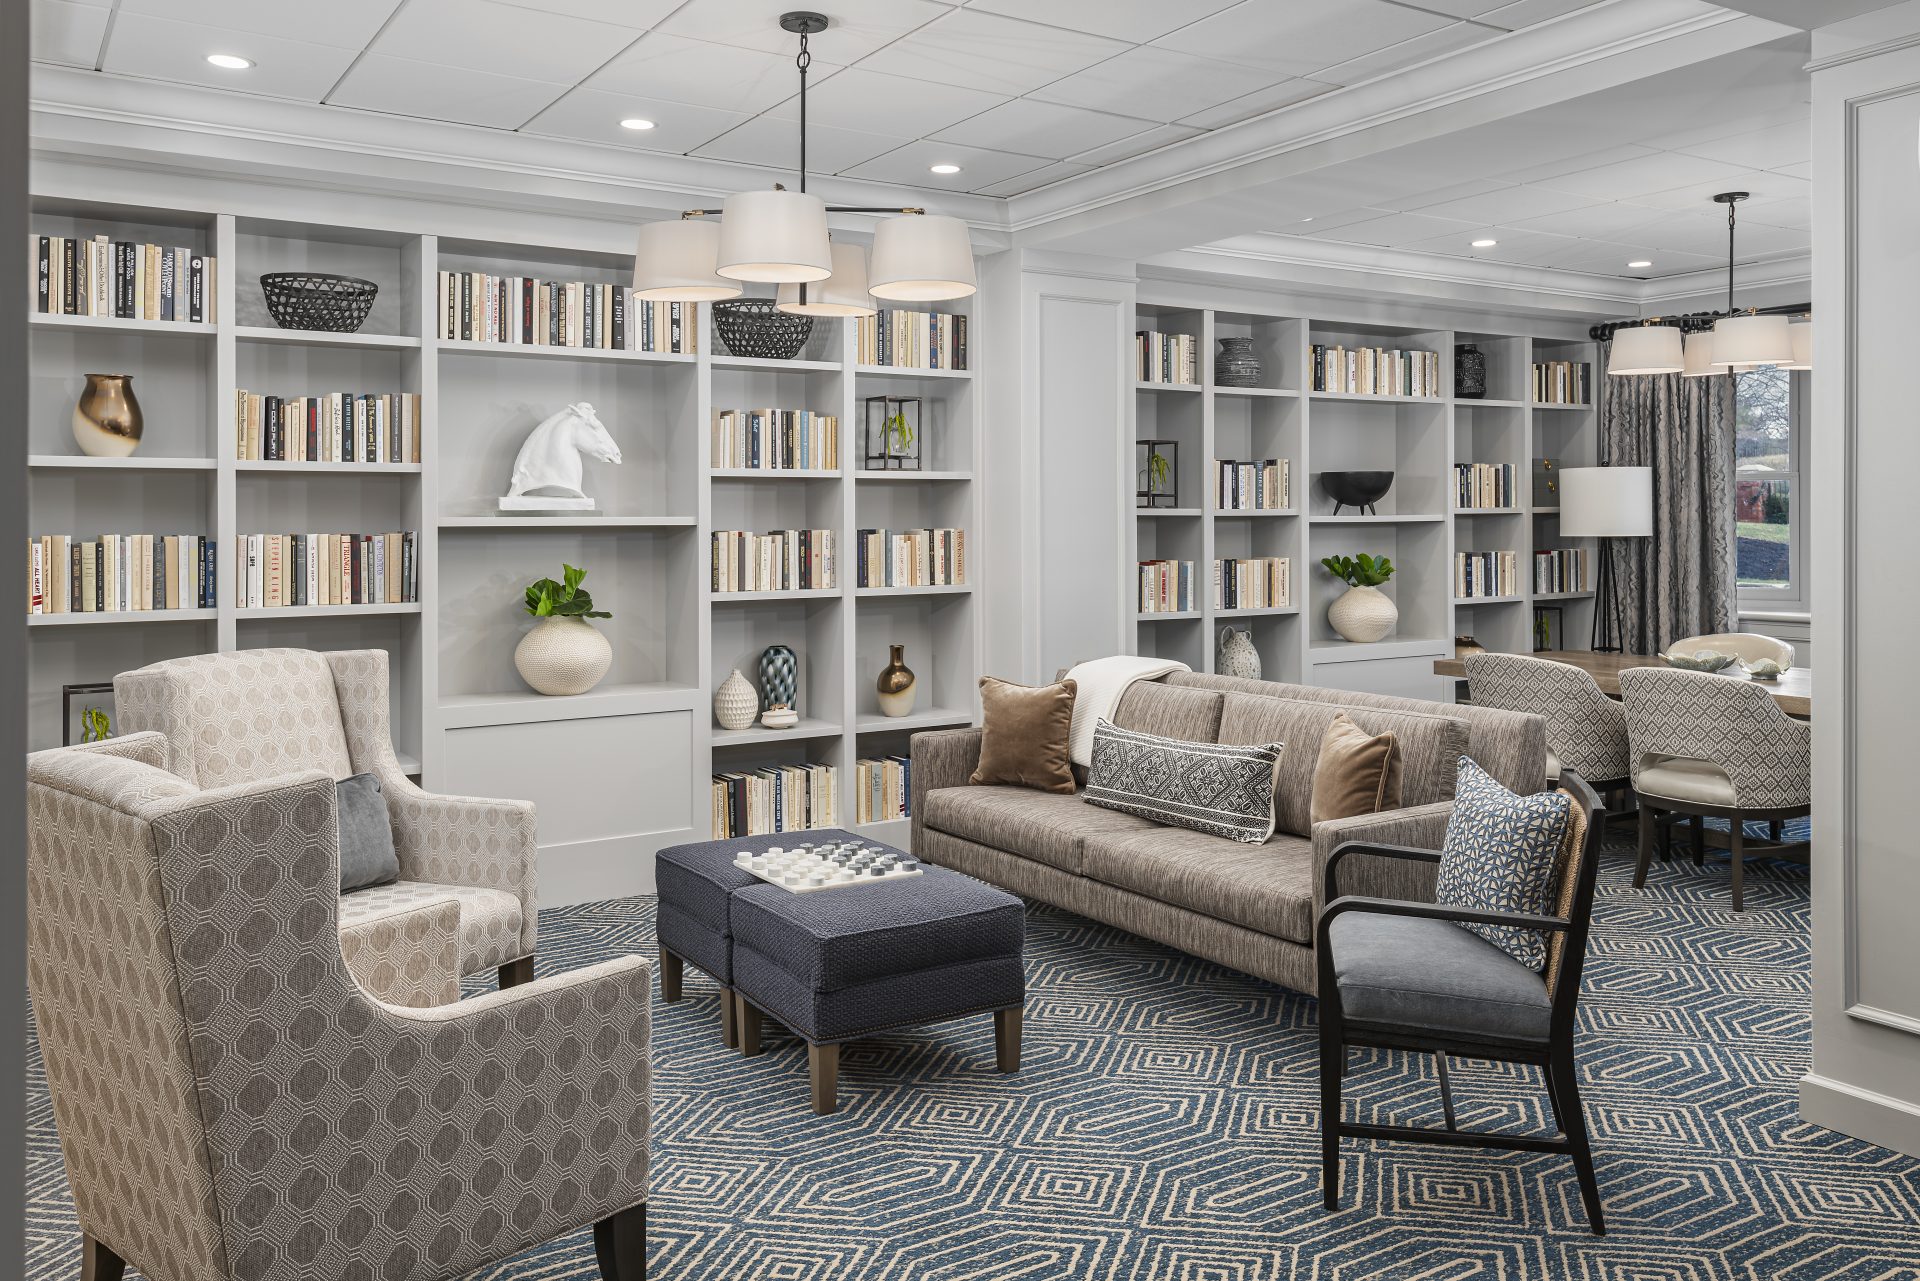 A cozy and elegant common area in a senior living community featuring bookshelves and comfortable seating.